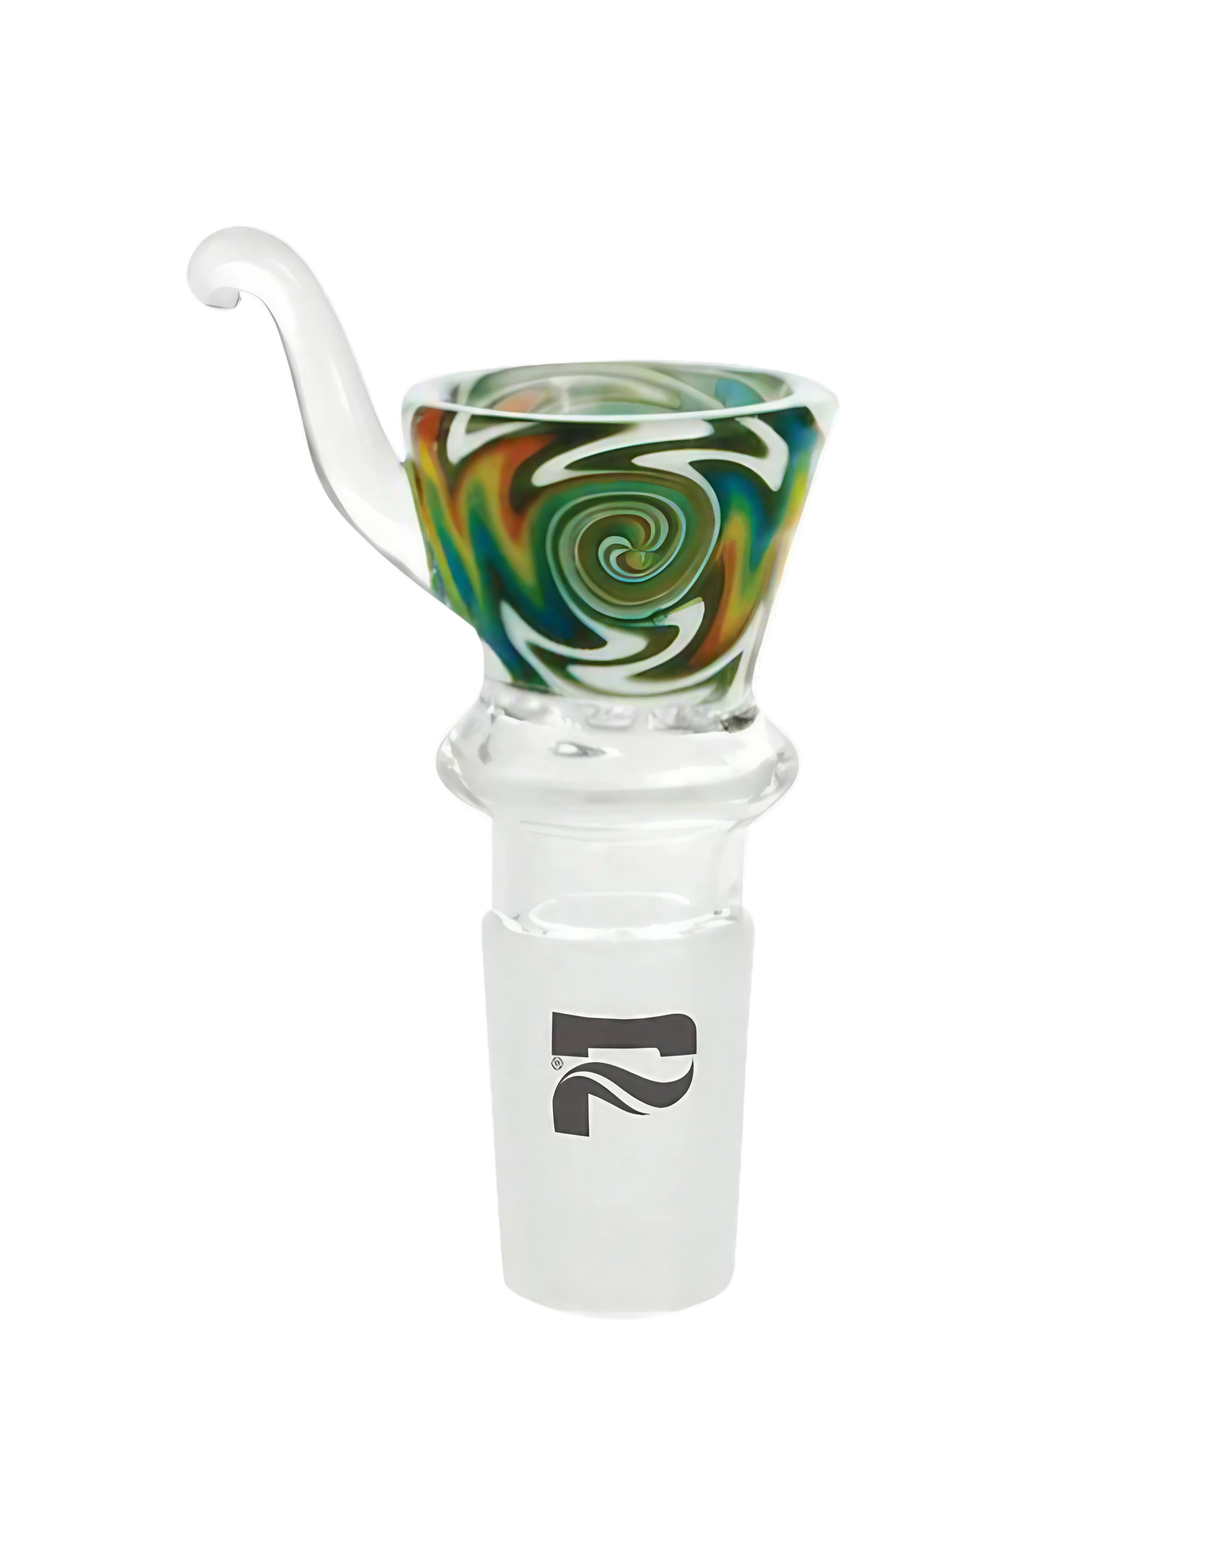 Pulsar Worked Herb Slide 19mm Male Bowl with colorful swirl design, front view on white background